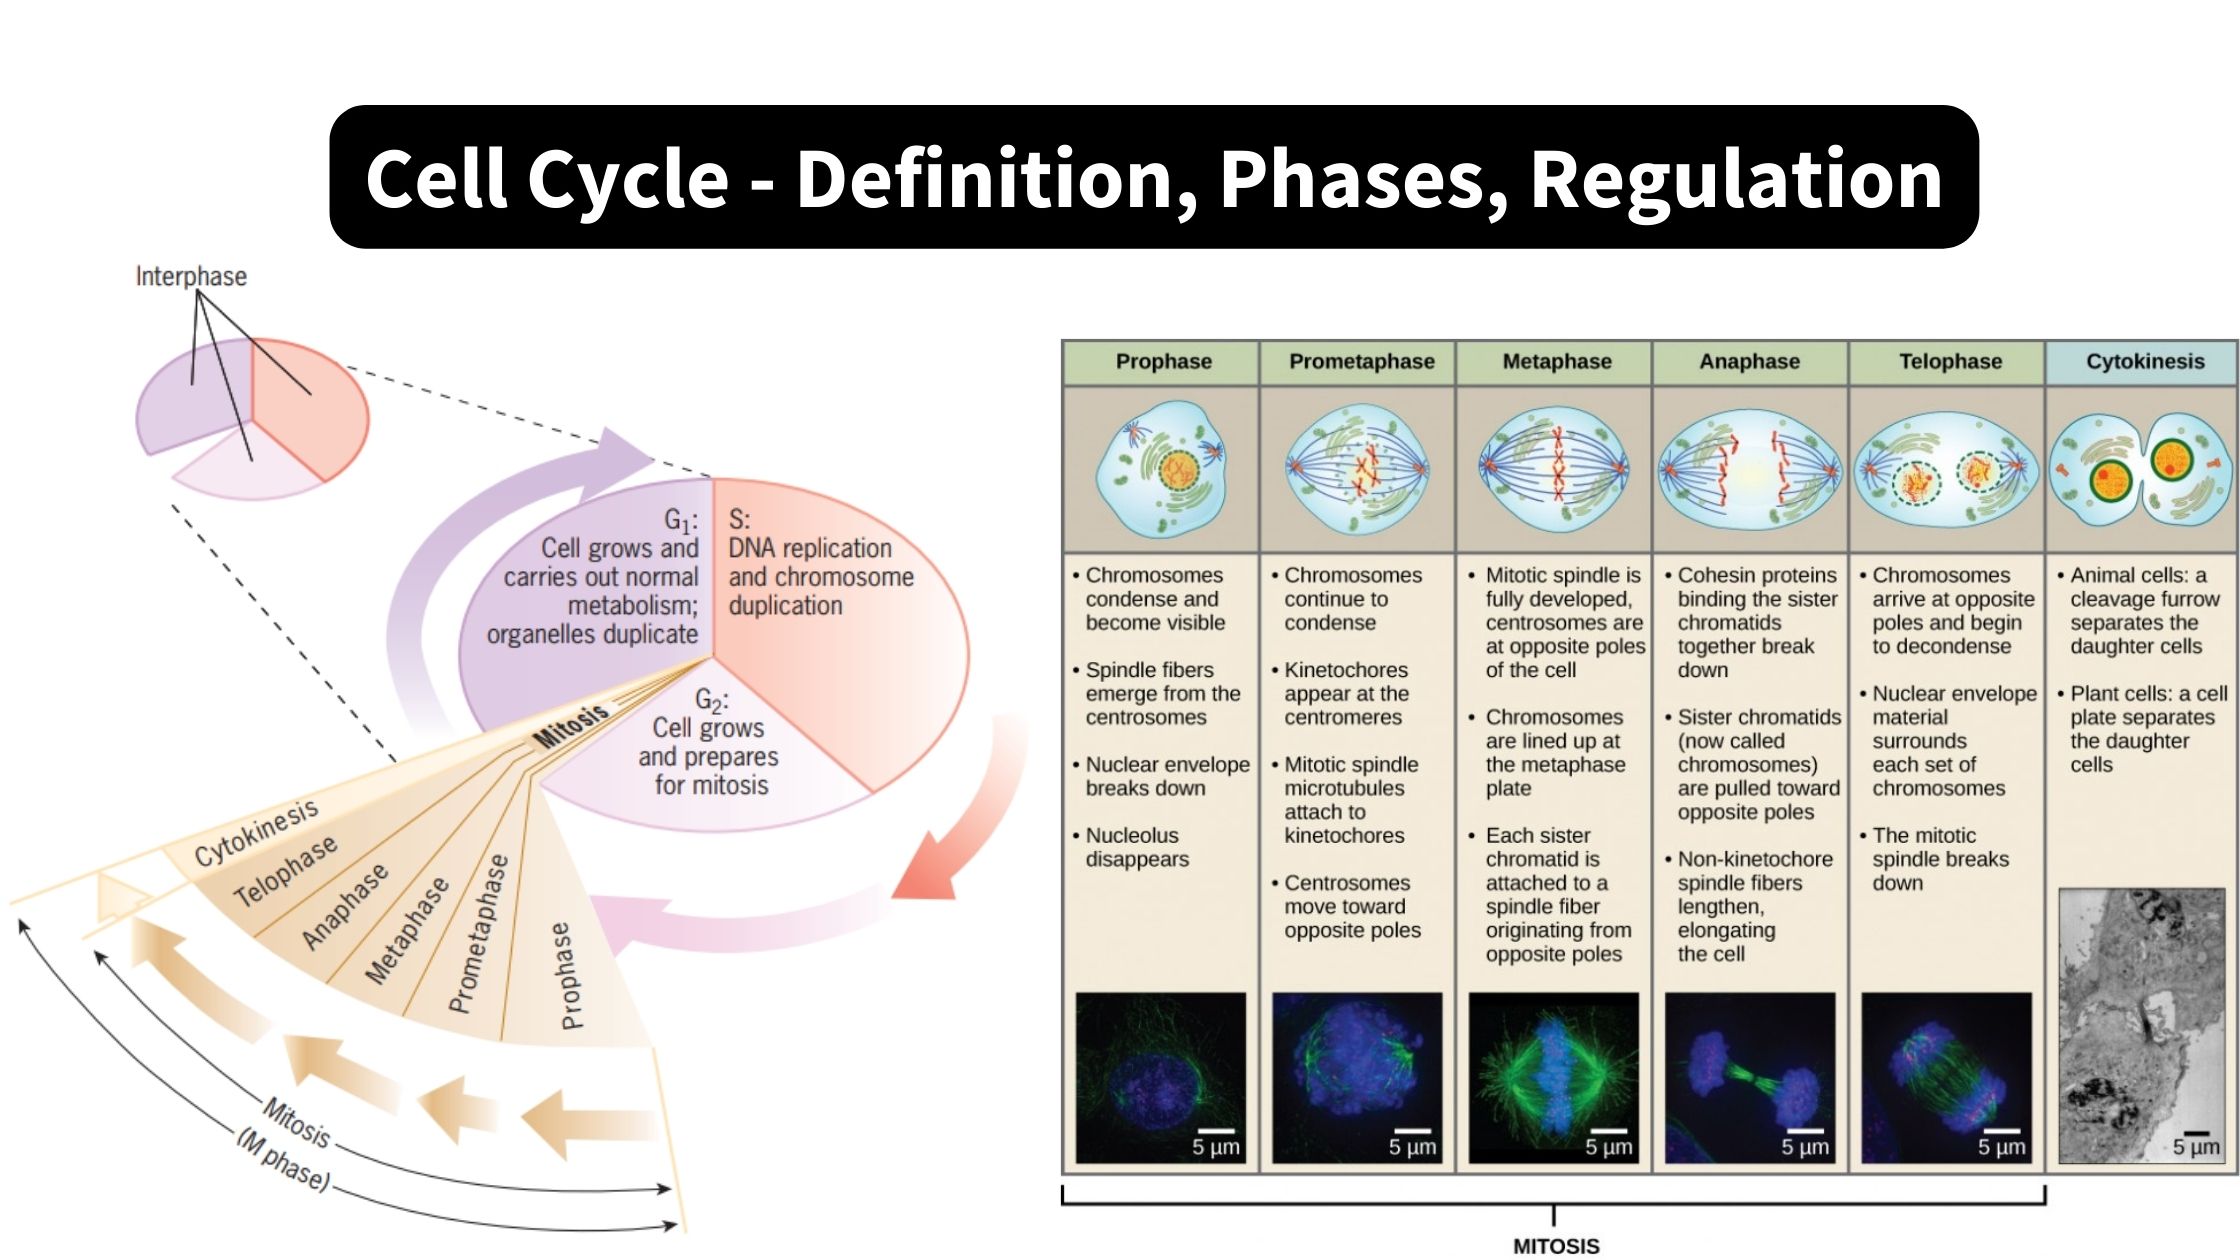 Cell Cycle - Definition, Phases, Regulation